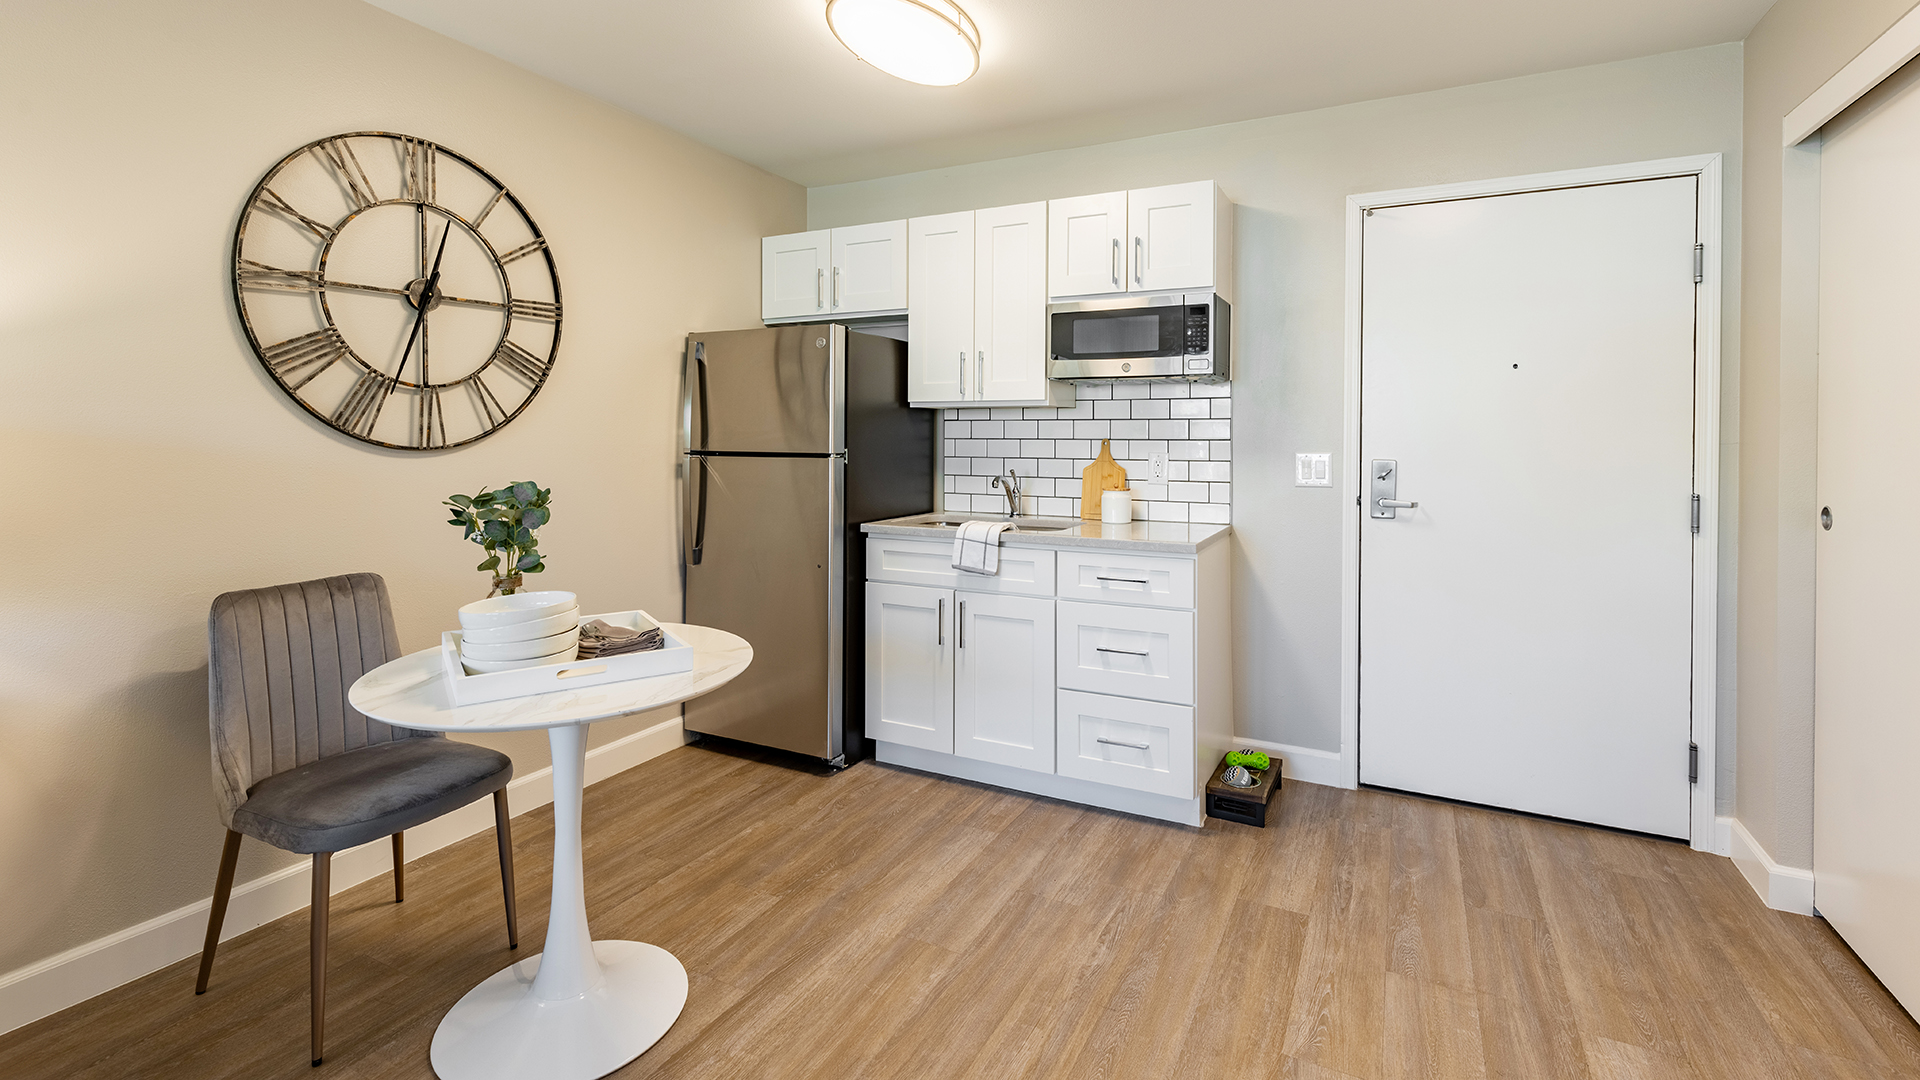 Holiday Chateau at Harveston apartment kitchenette with stainless refrigerator, sink, and microwave with small dining table